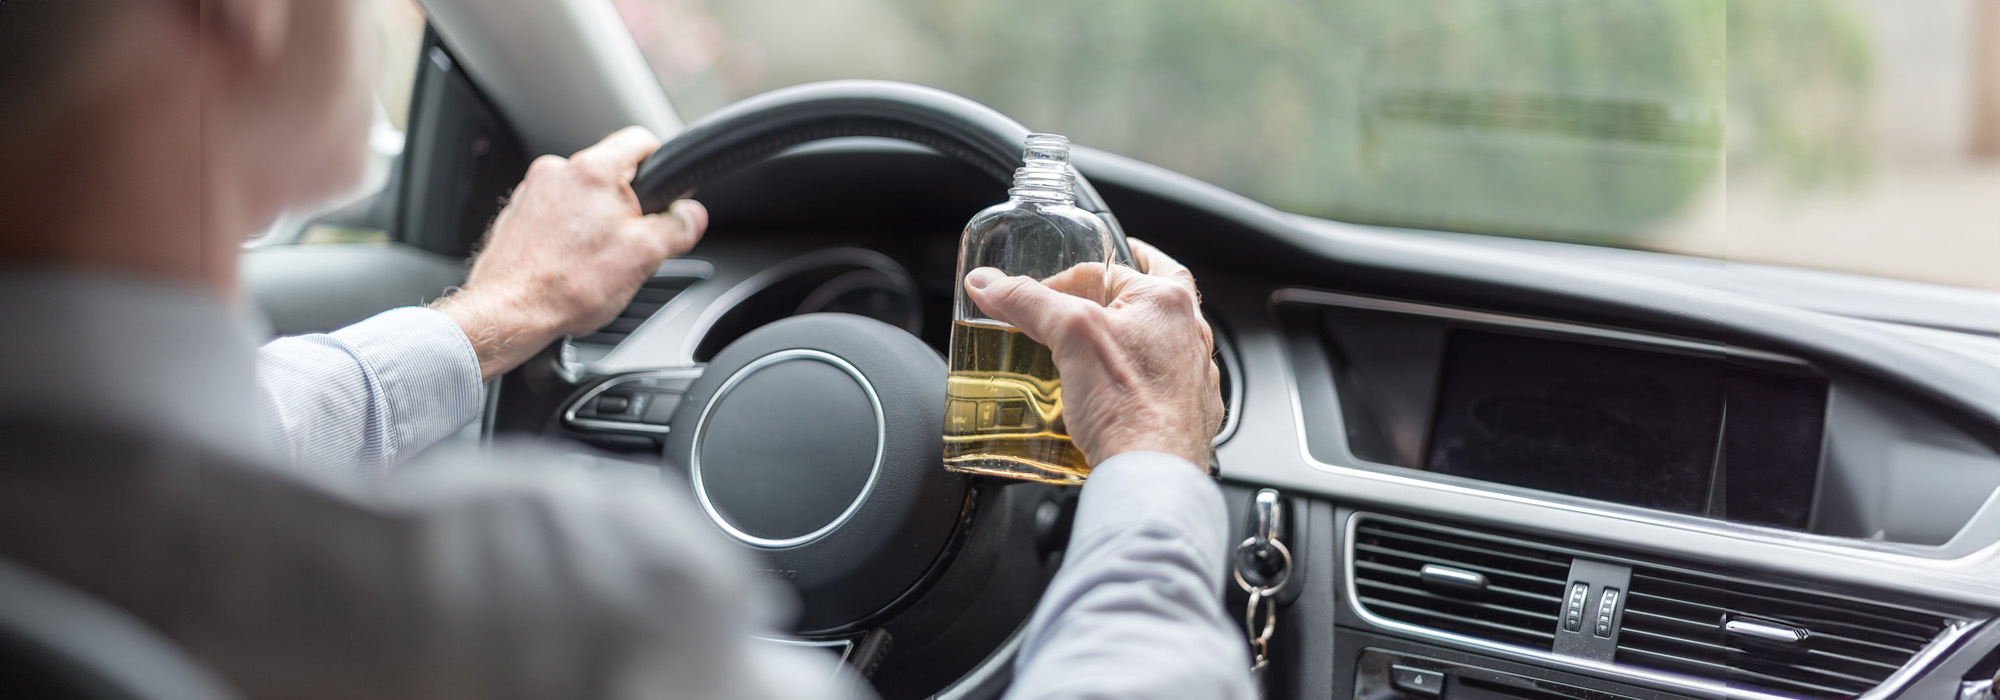 man drinking alcohol and driving